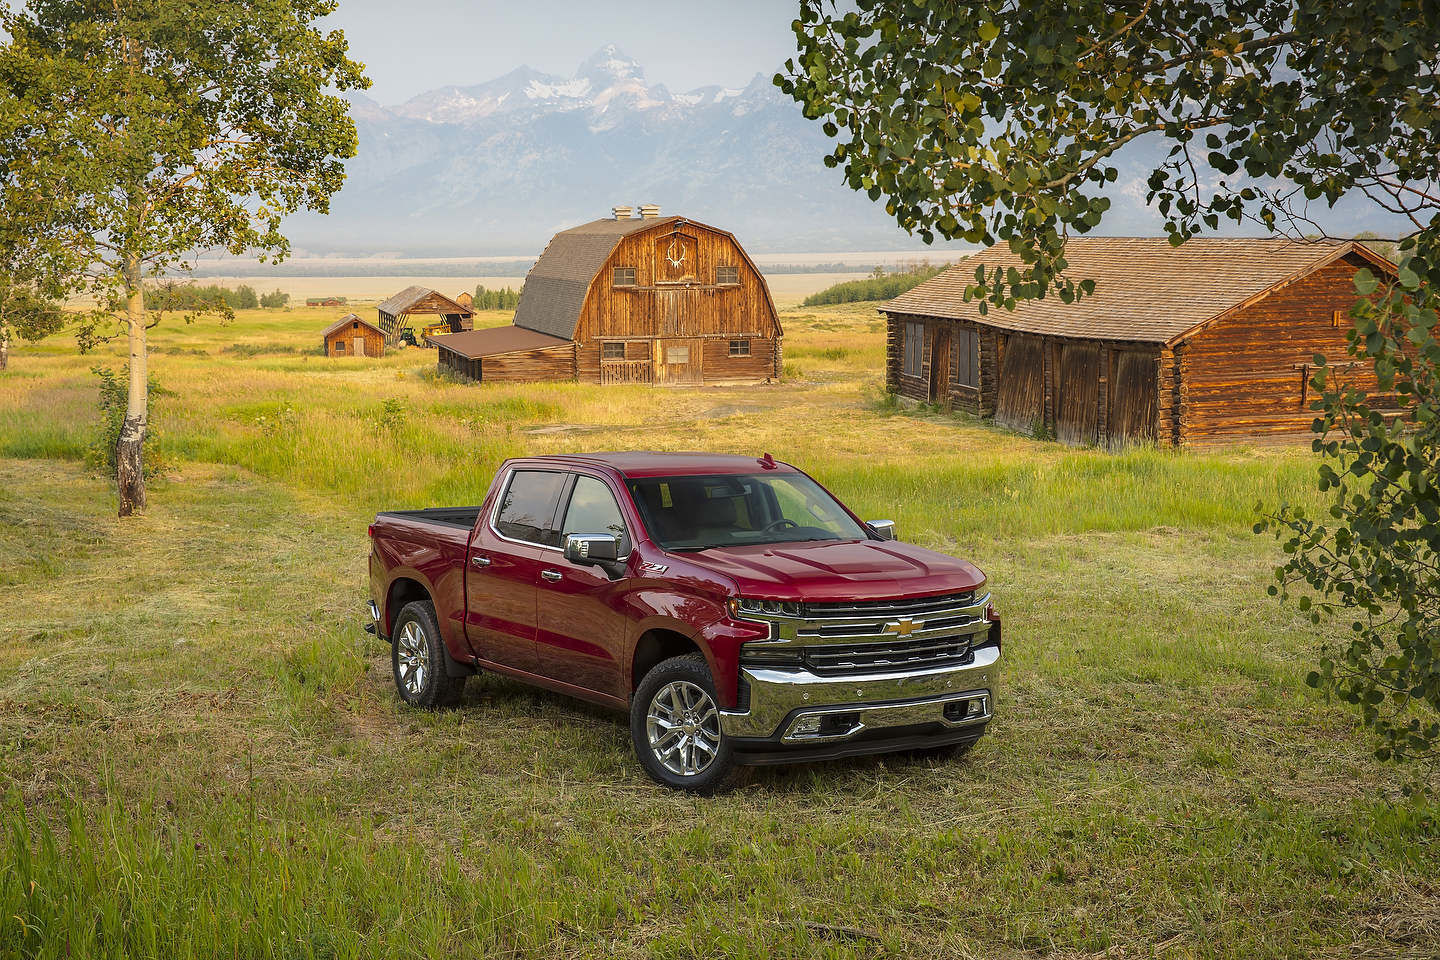 Why choose the 2.7-litre 4-cylinder engine with Chevrolet and GMC pickups?